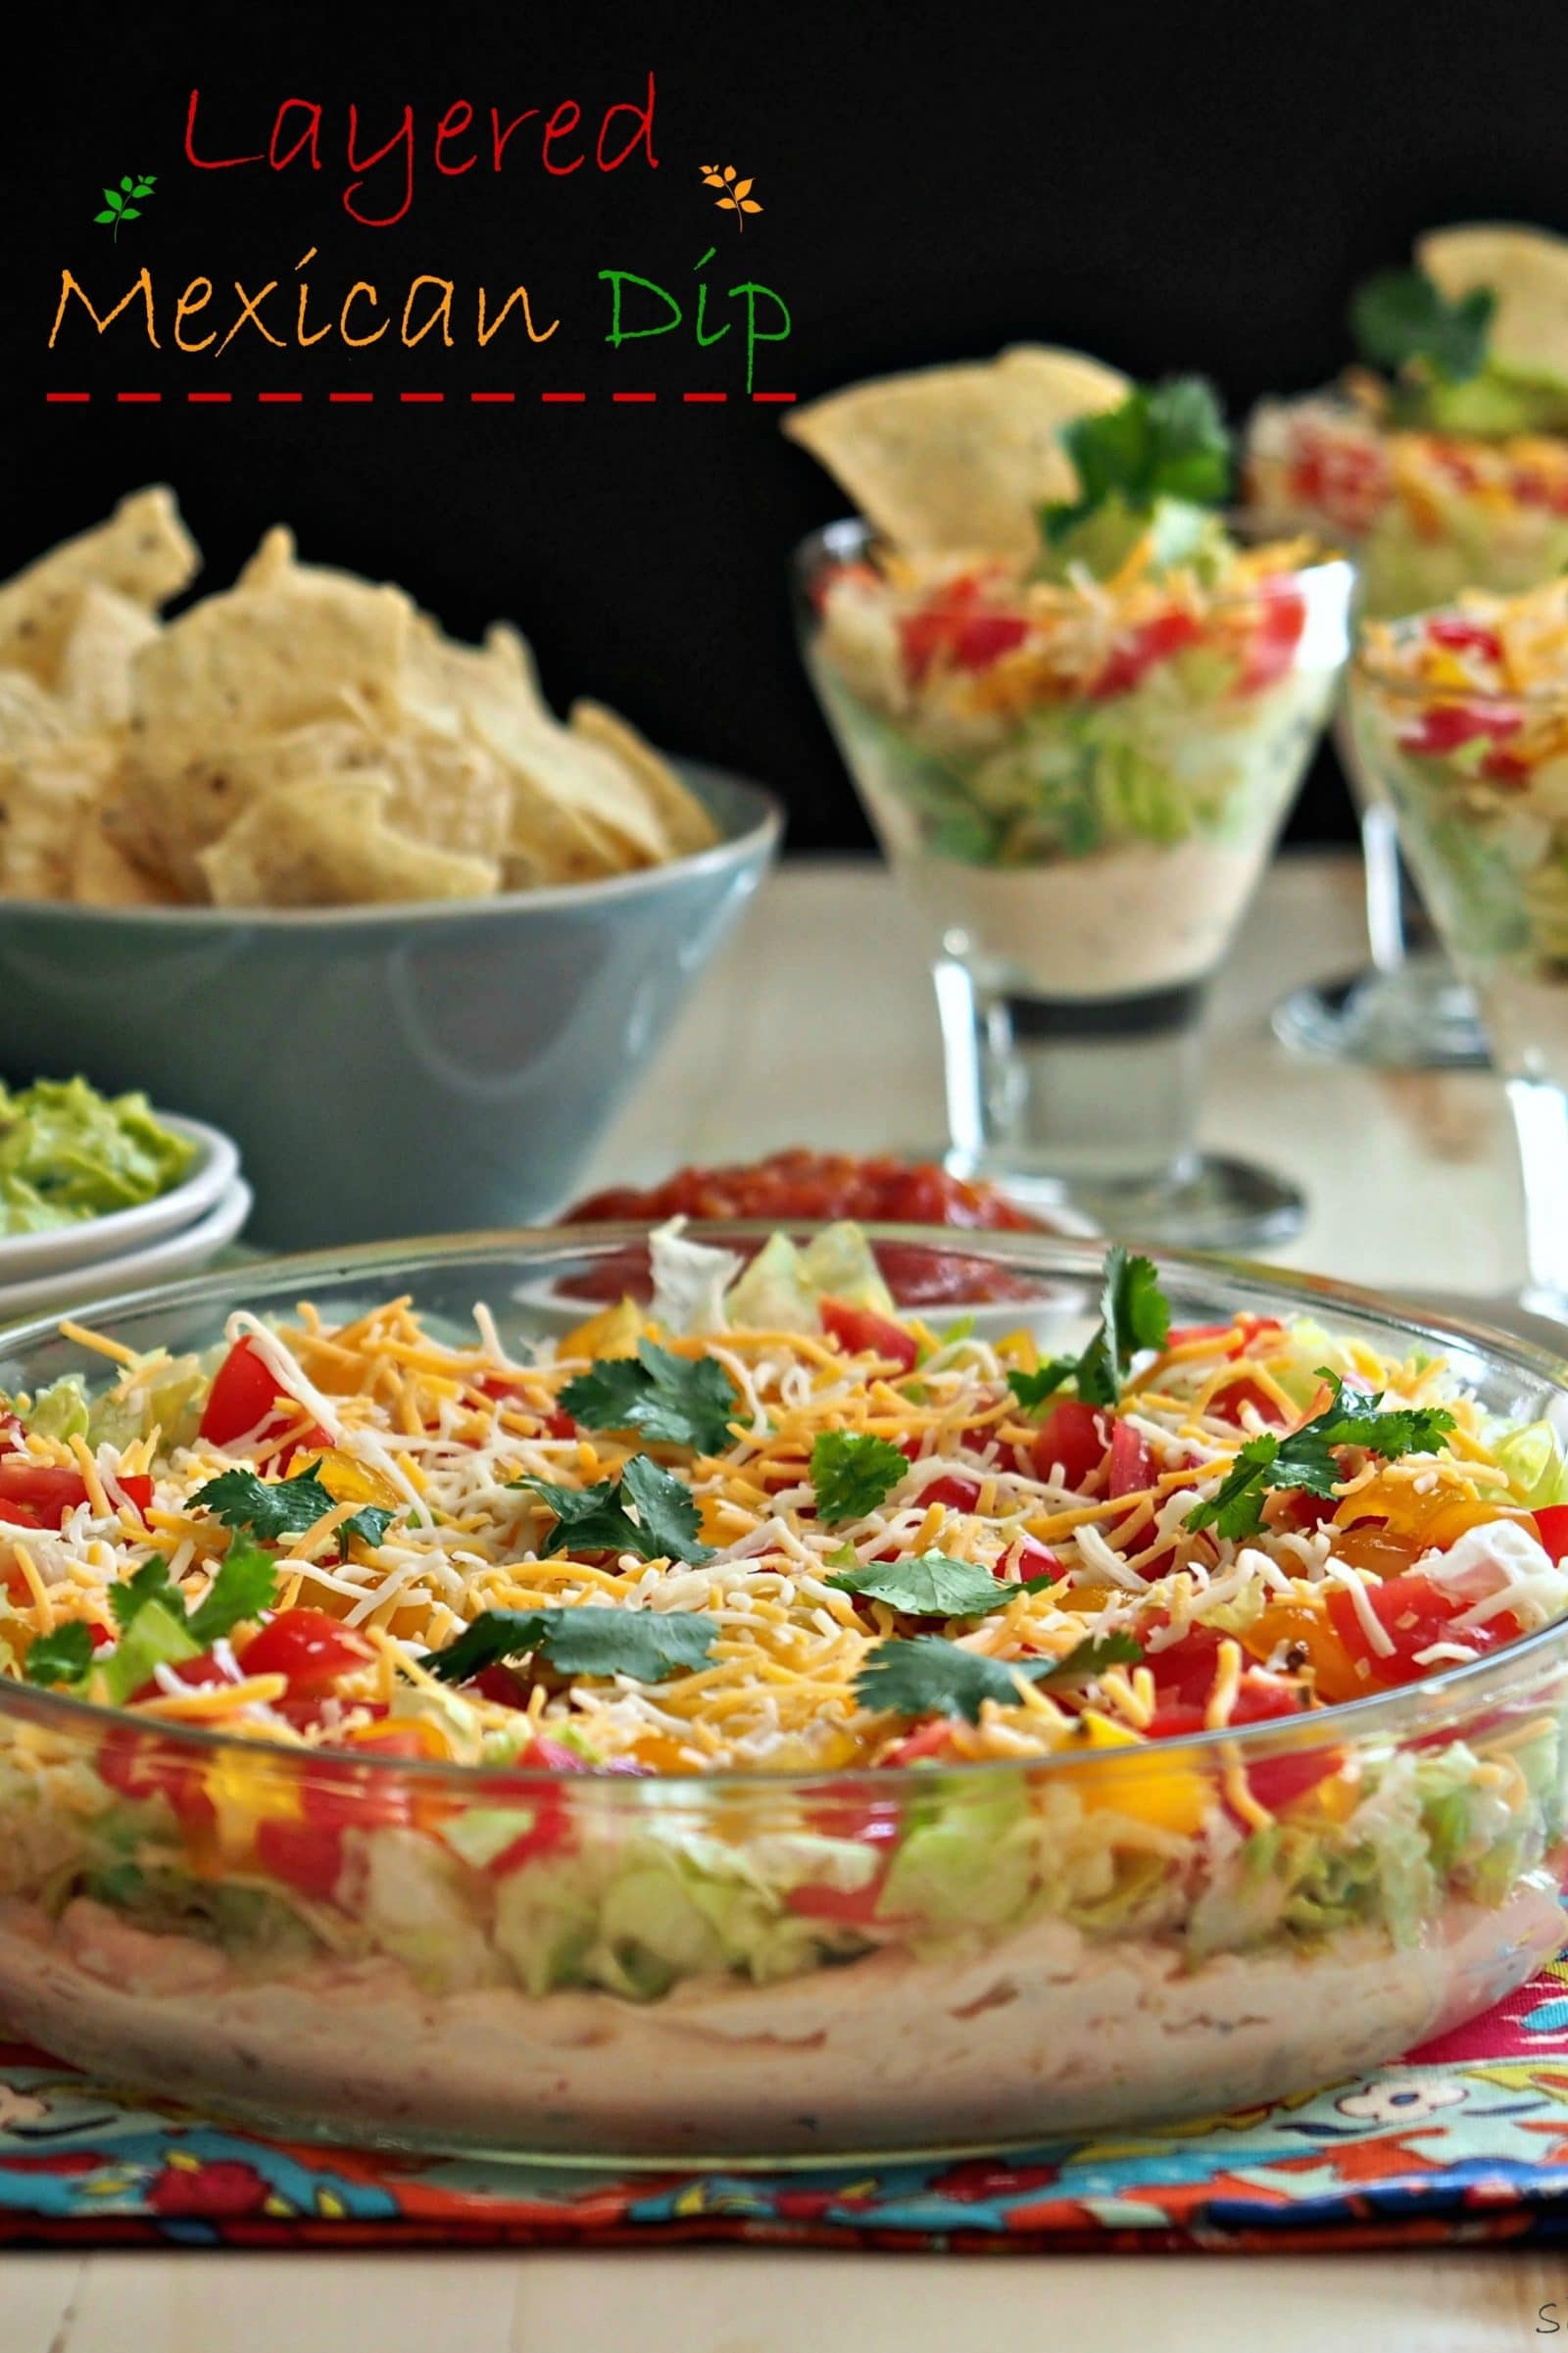 Layered Mexican Dip is as cozy as a patchwork quilt. It is an all-time favorite in its simplest form. Cream cheese, salsa, cheese, lettuce & tomatoes. Simply Sated